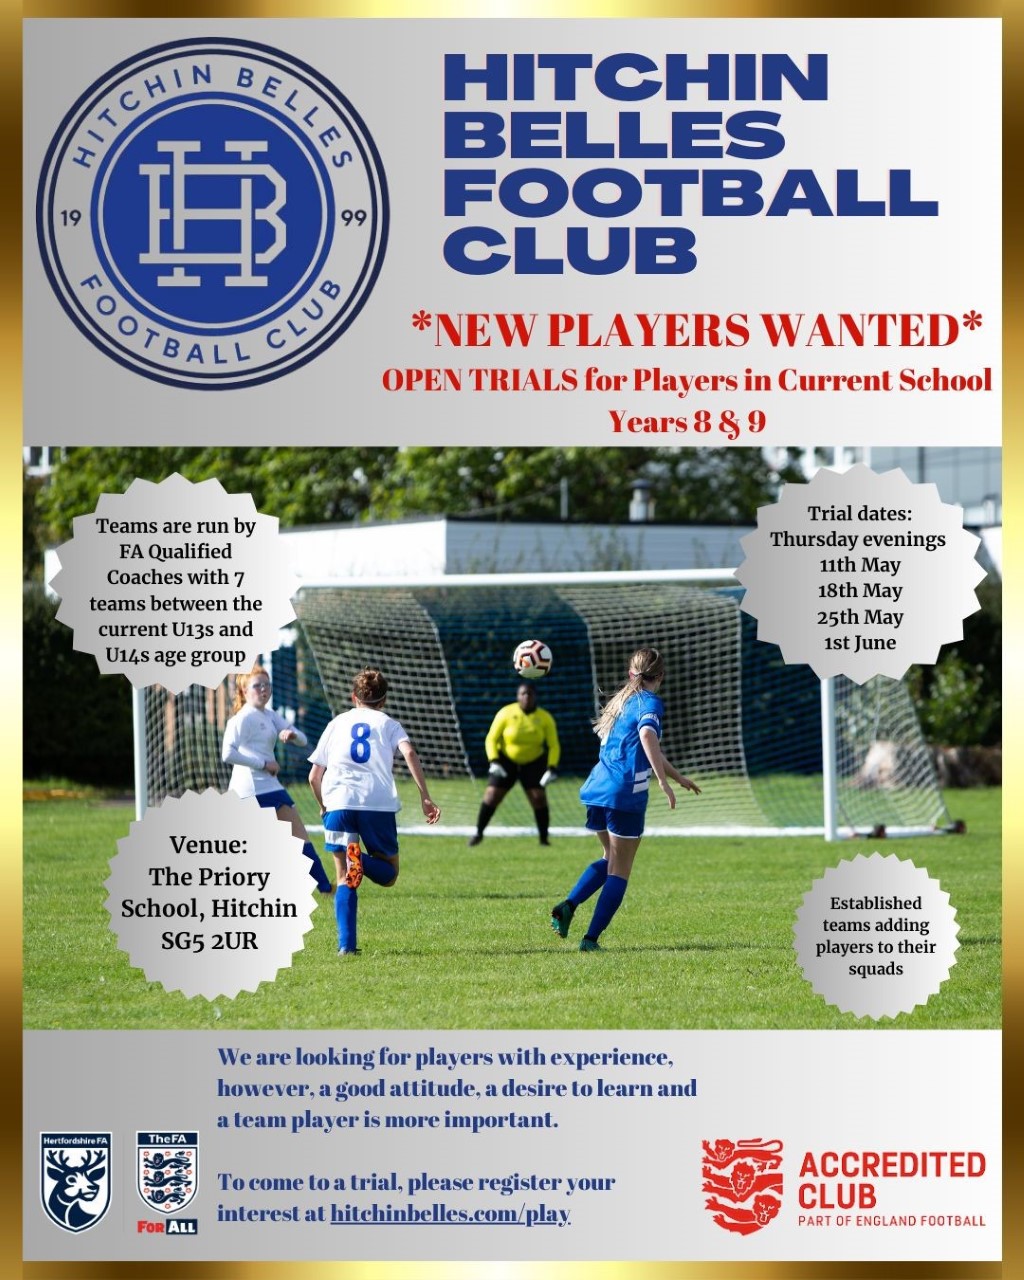 Poster for Hitchin Belles football club, try outs